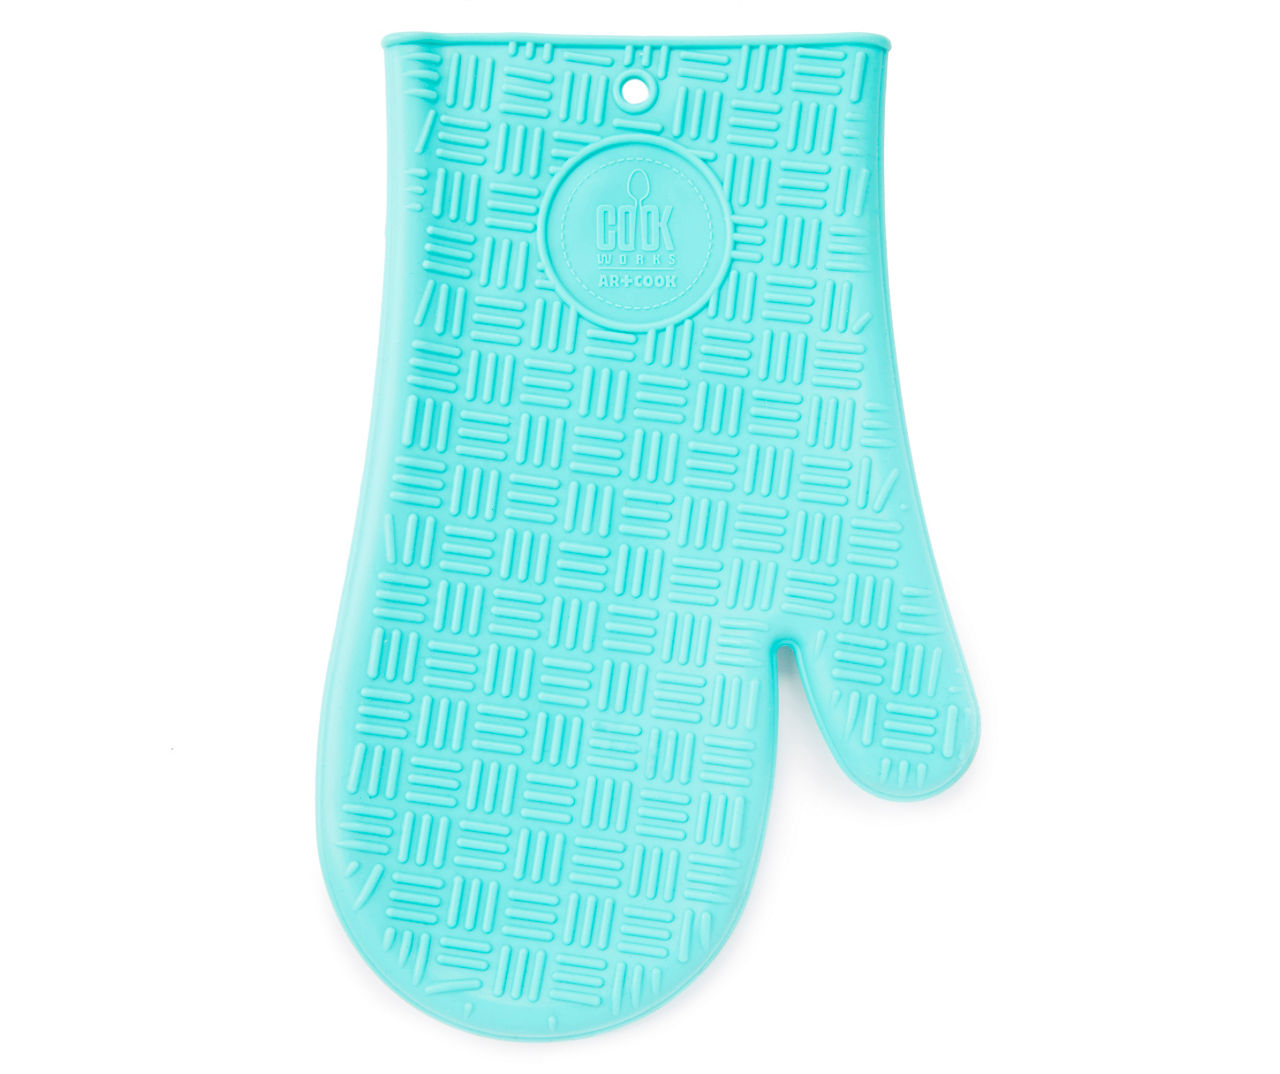 Celebrate It Silicone Oven Mitt - Turquoise - 13 x 7.2 x 1 in